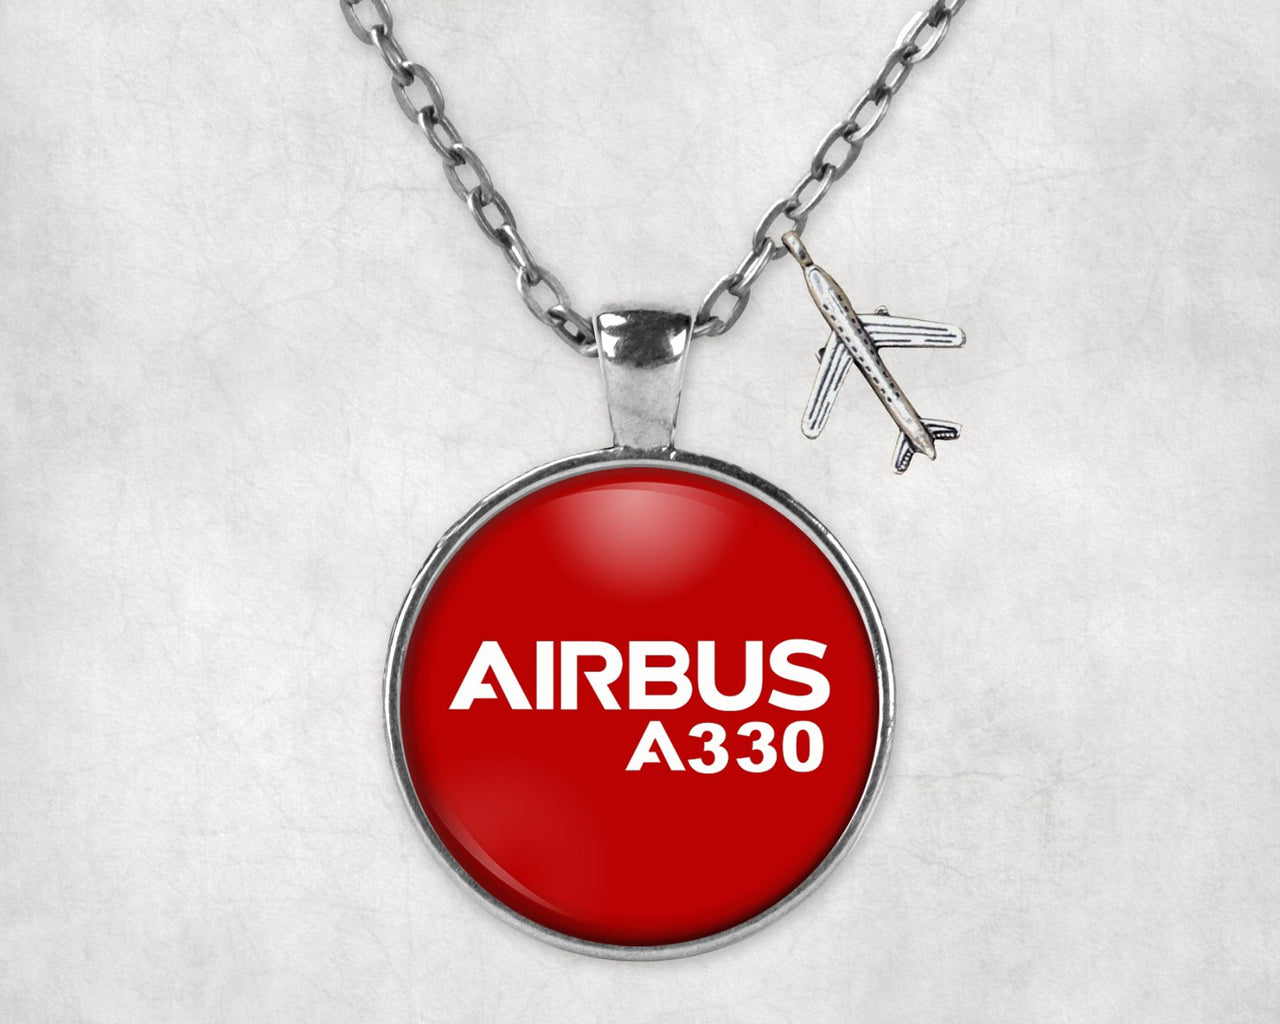 Airbus A330 & Text Designed Necklaces